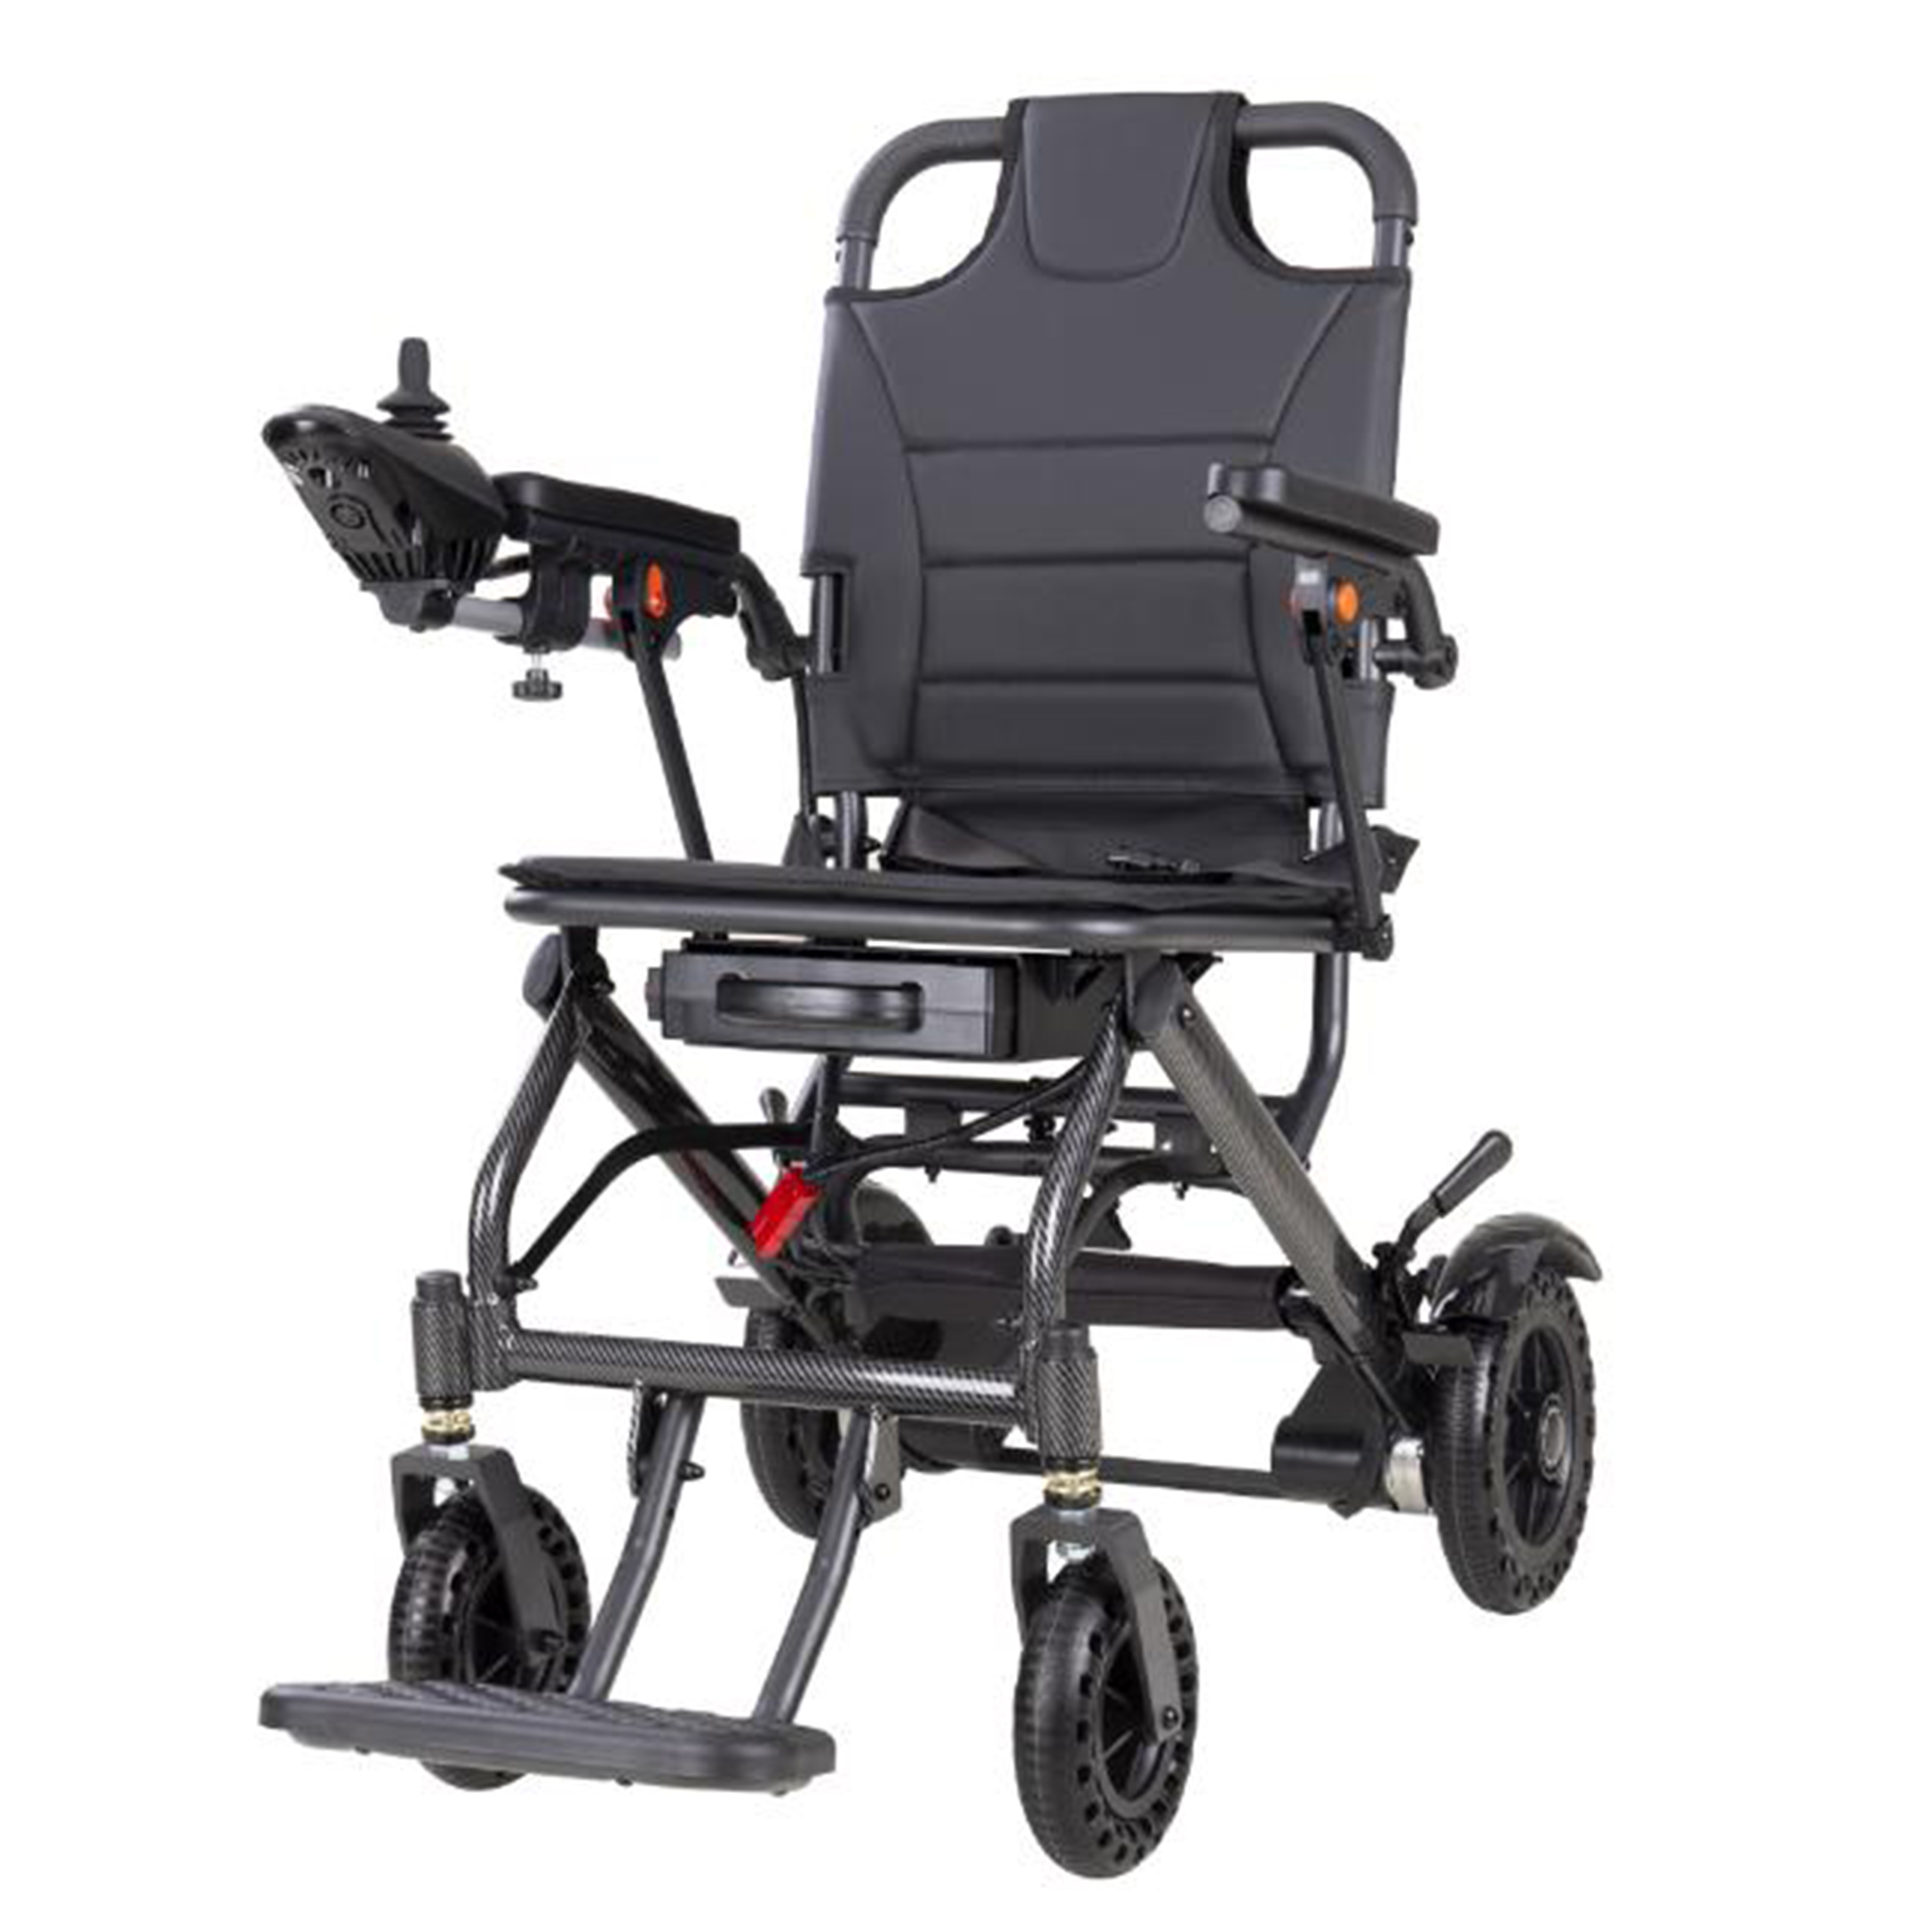 The use of wheelchairs in some emergency rescue situations